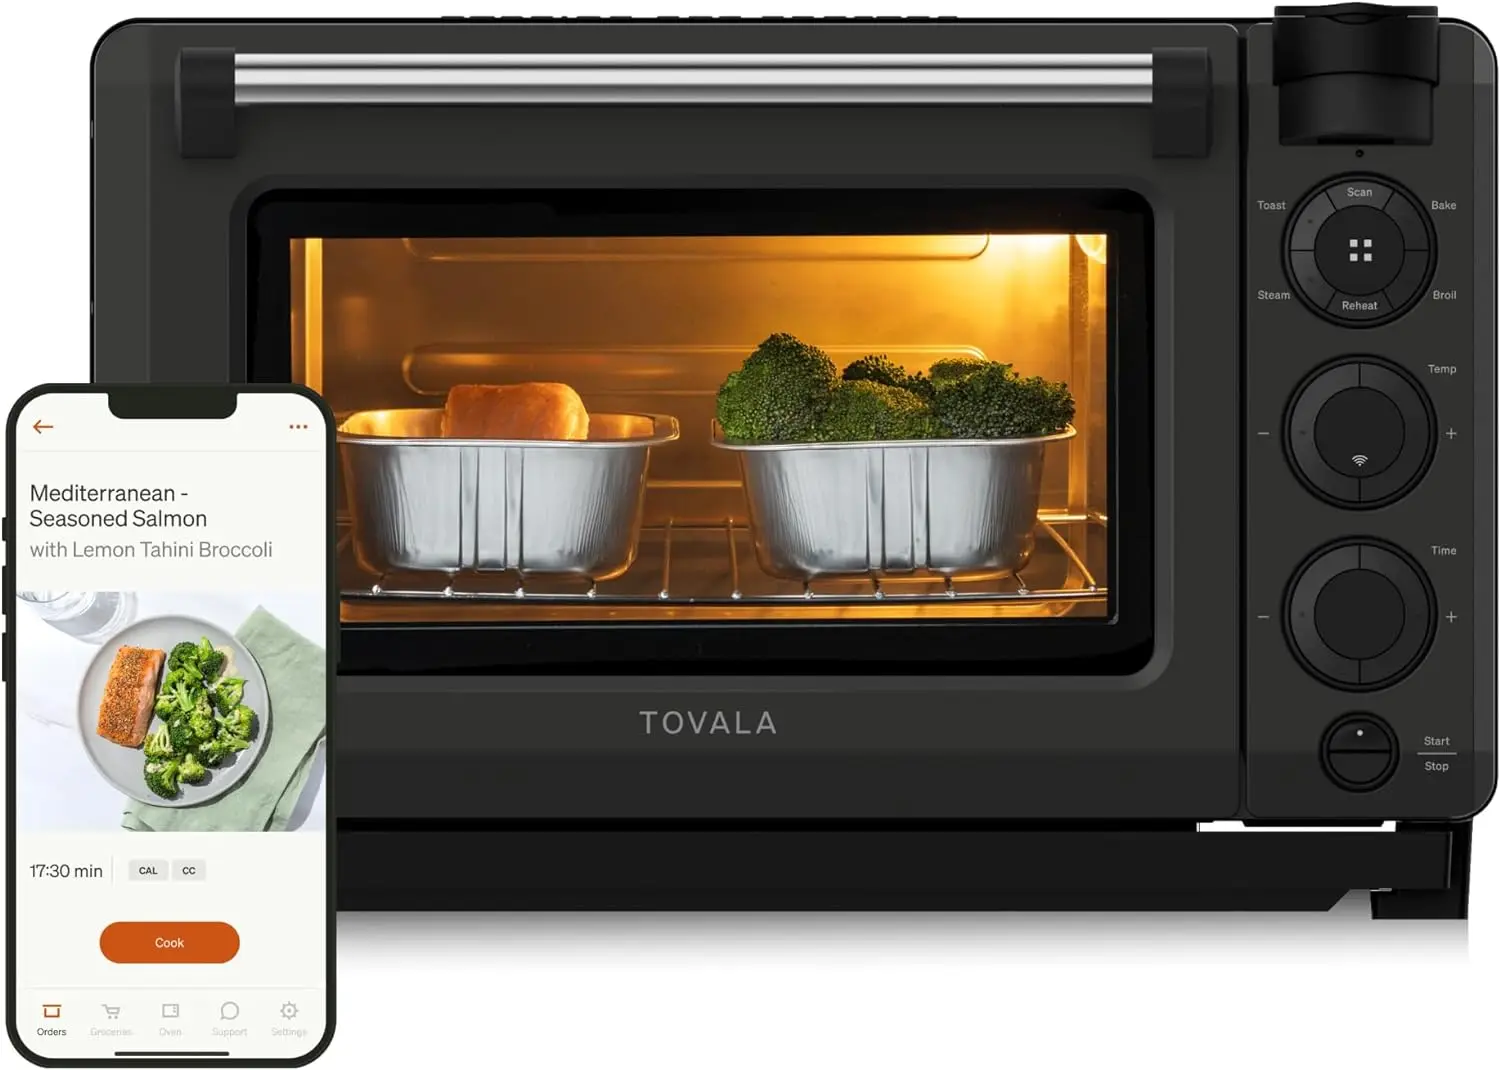 

Tovala Smart Oven Pro, 6-in-1 Countertop Convection Oven - Steam, Toast, Air Fry, Bake, Broil